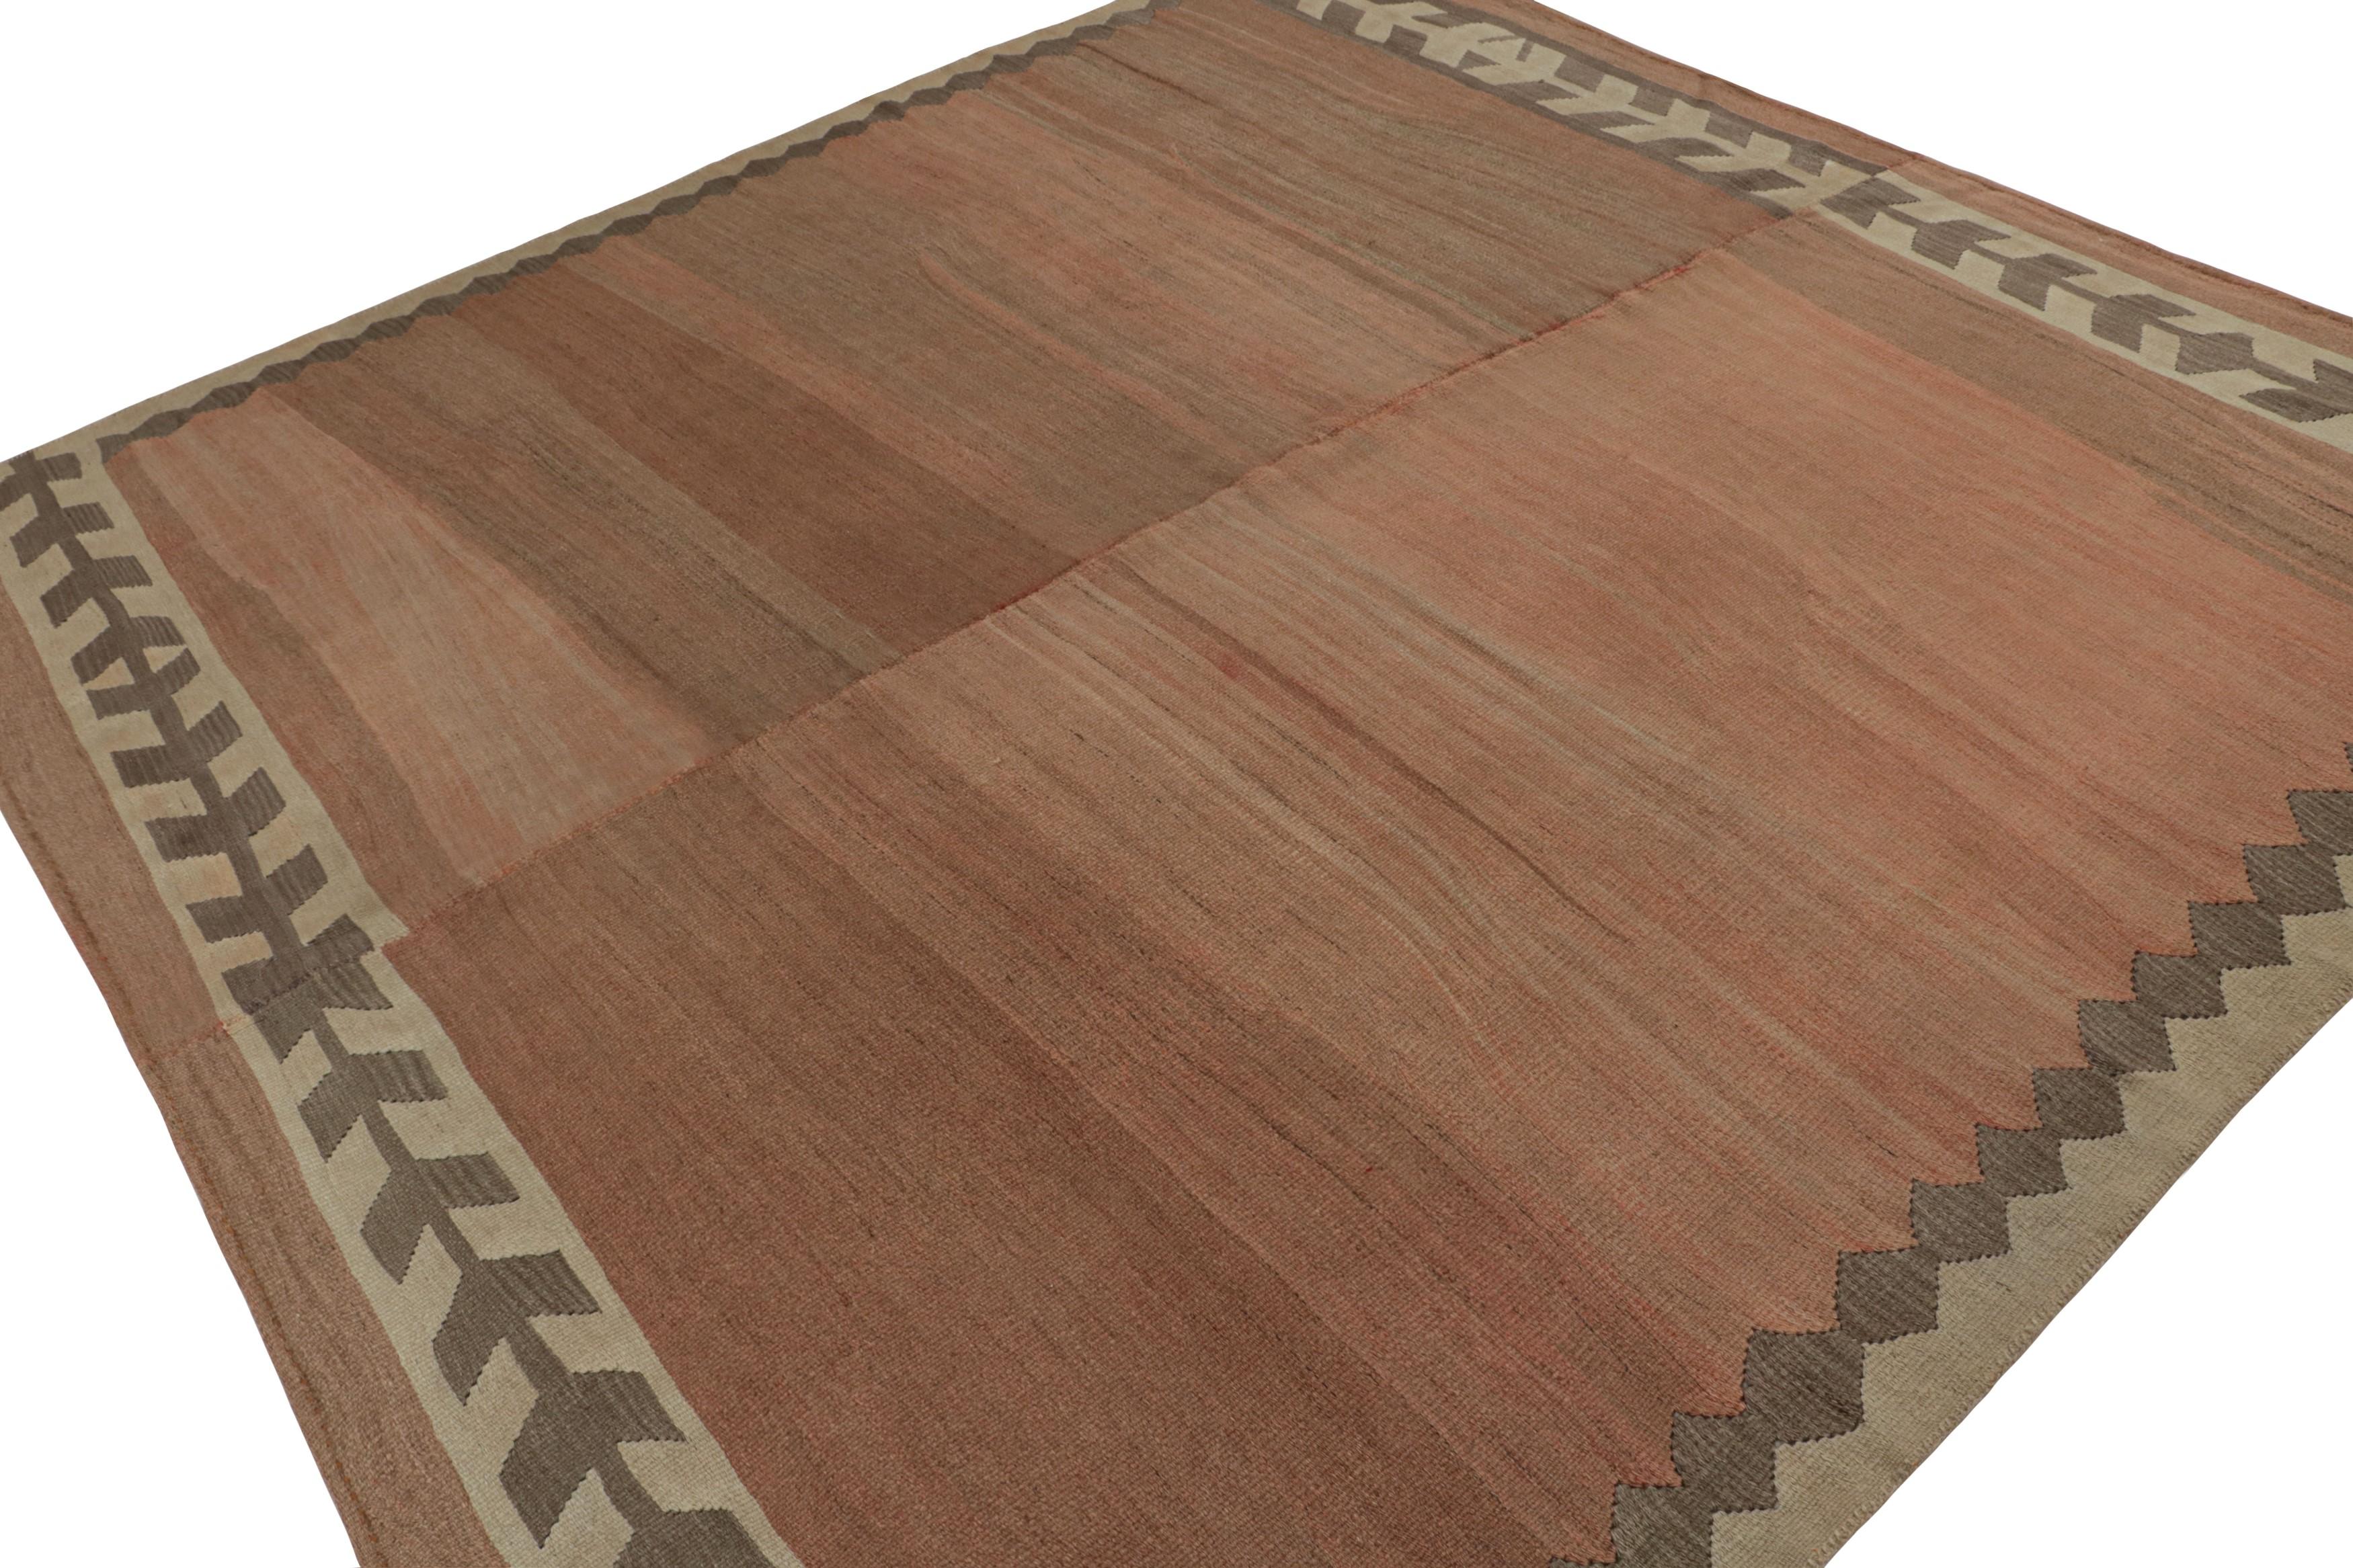 Handwoven in wool circa 1950-1960, this 9x9 vintage Afghan kilim is a new curation from Rug & Kilim’s collection. 

On the Design:

This particular rare piece enjoys a rich brown open field with an extremely minimal border. The constitution embraces